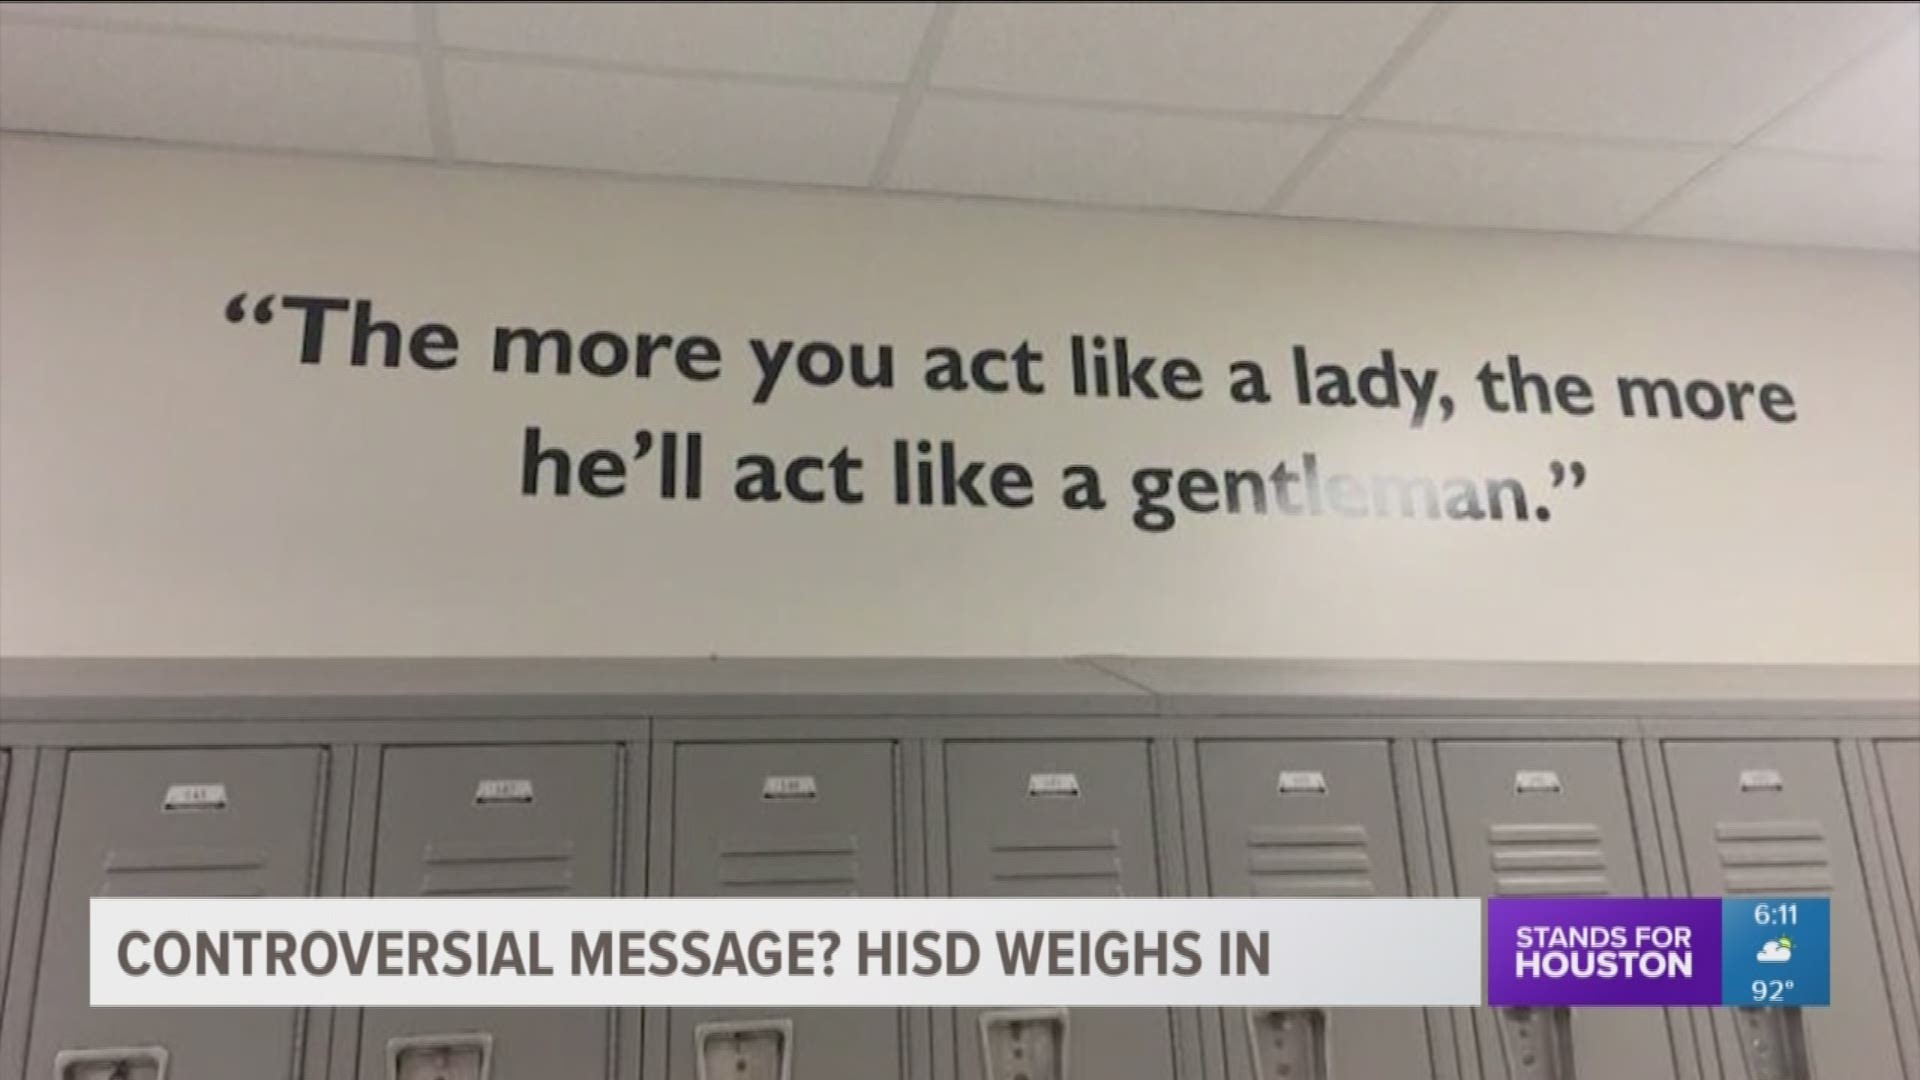 HISD is offering a new take on this controversial message written on a wall at Gregory-Lincoln Education Center.